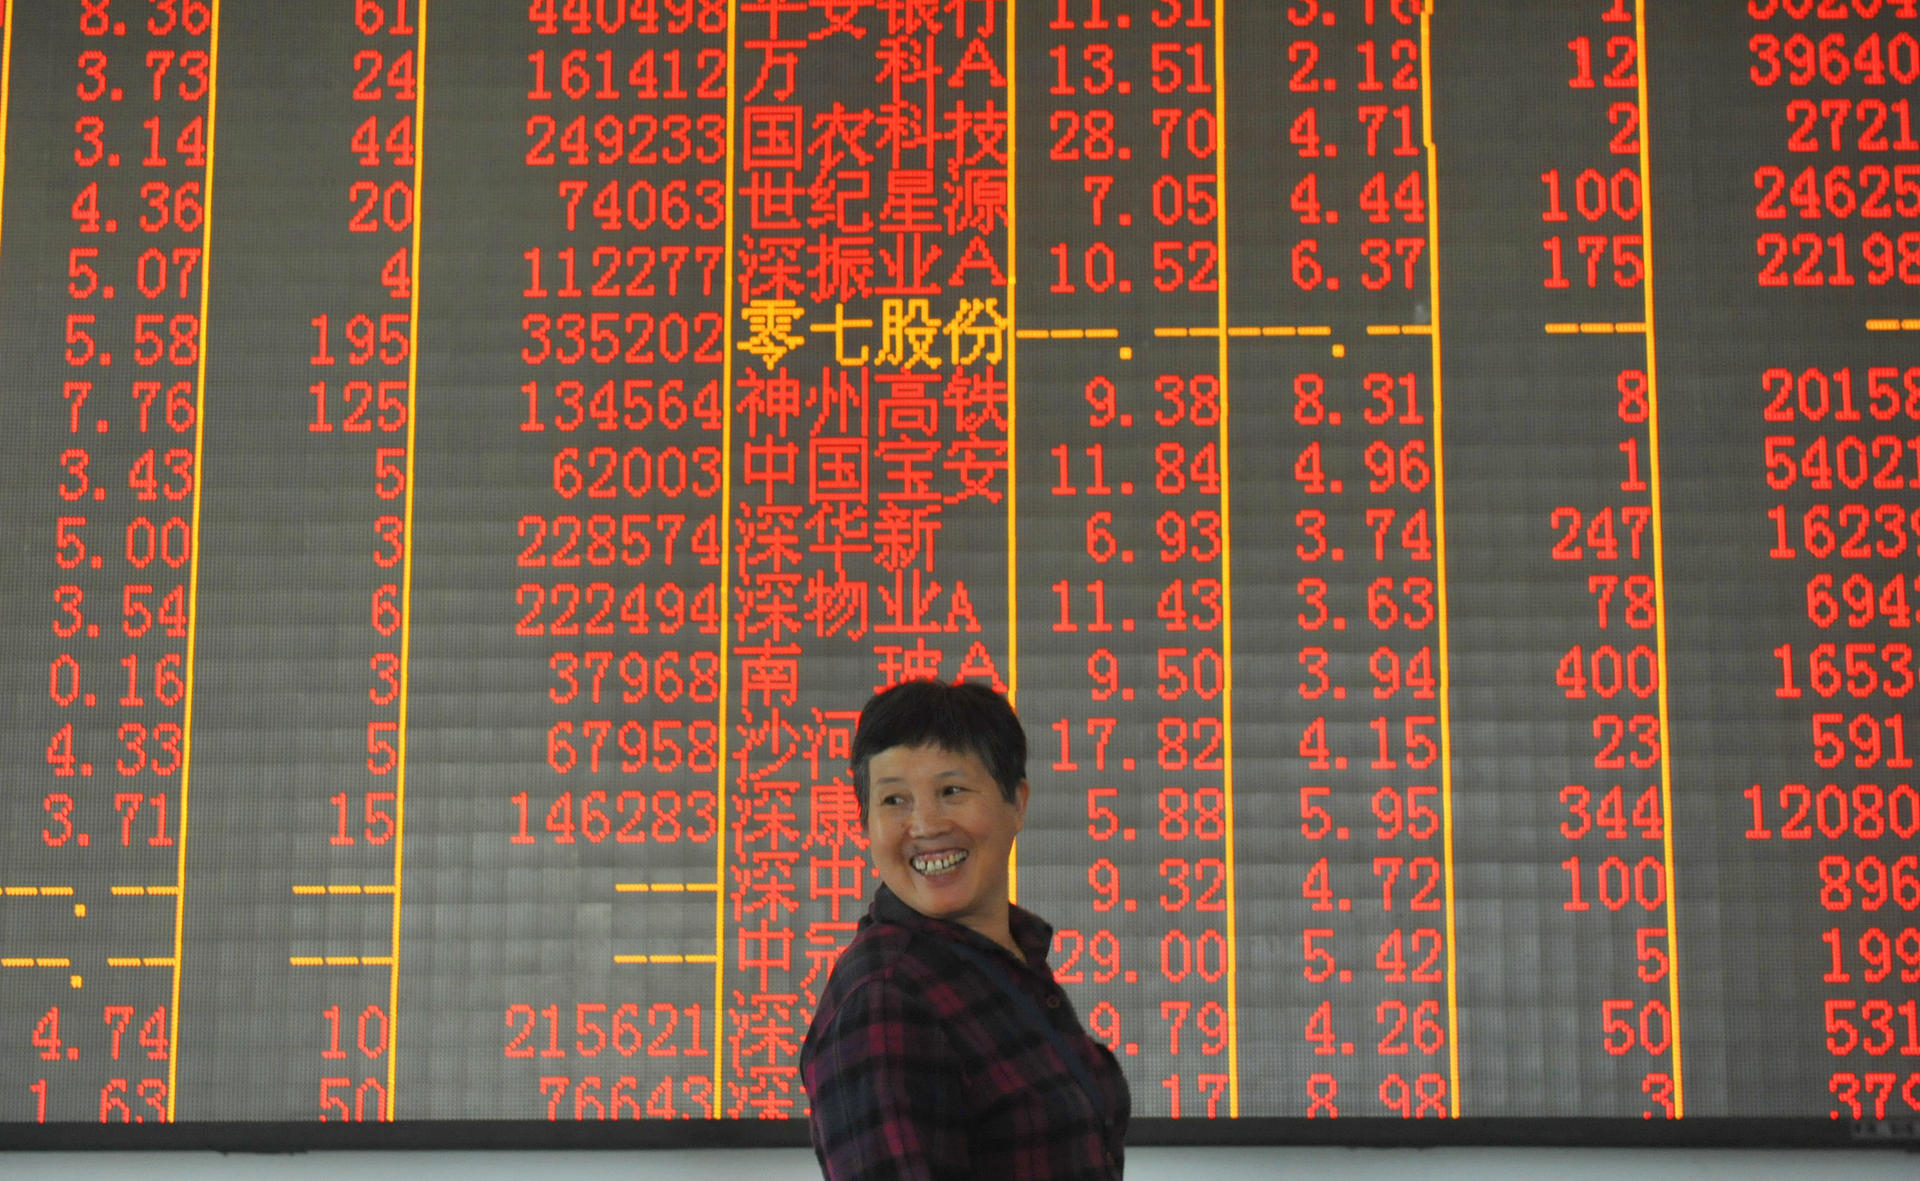 A mainland investor shows her joy as the share market continues its rise after the National Day holiday. Photo: ImagineChina